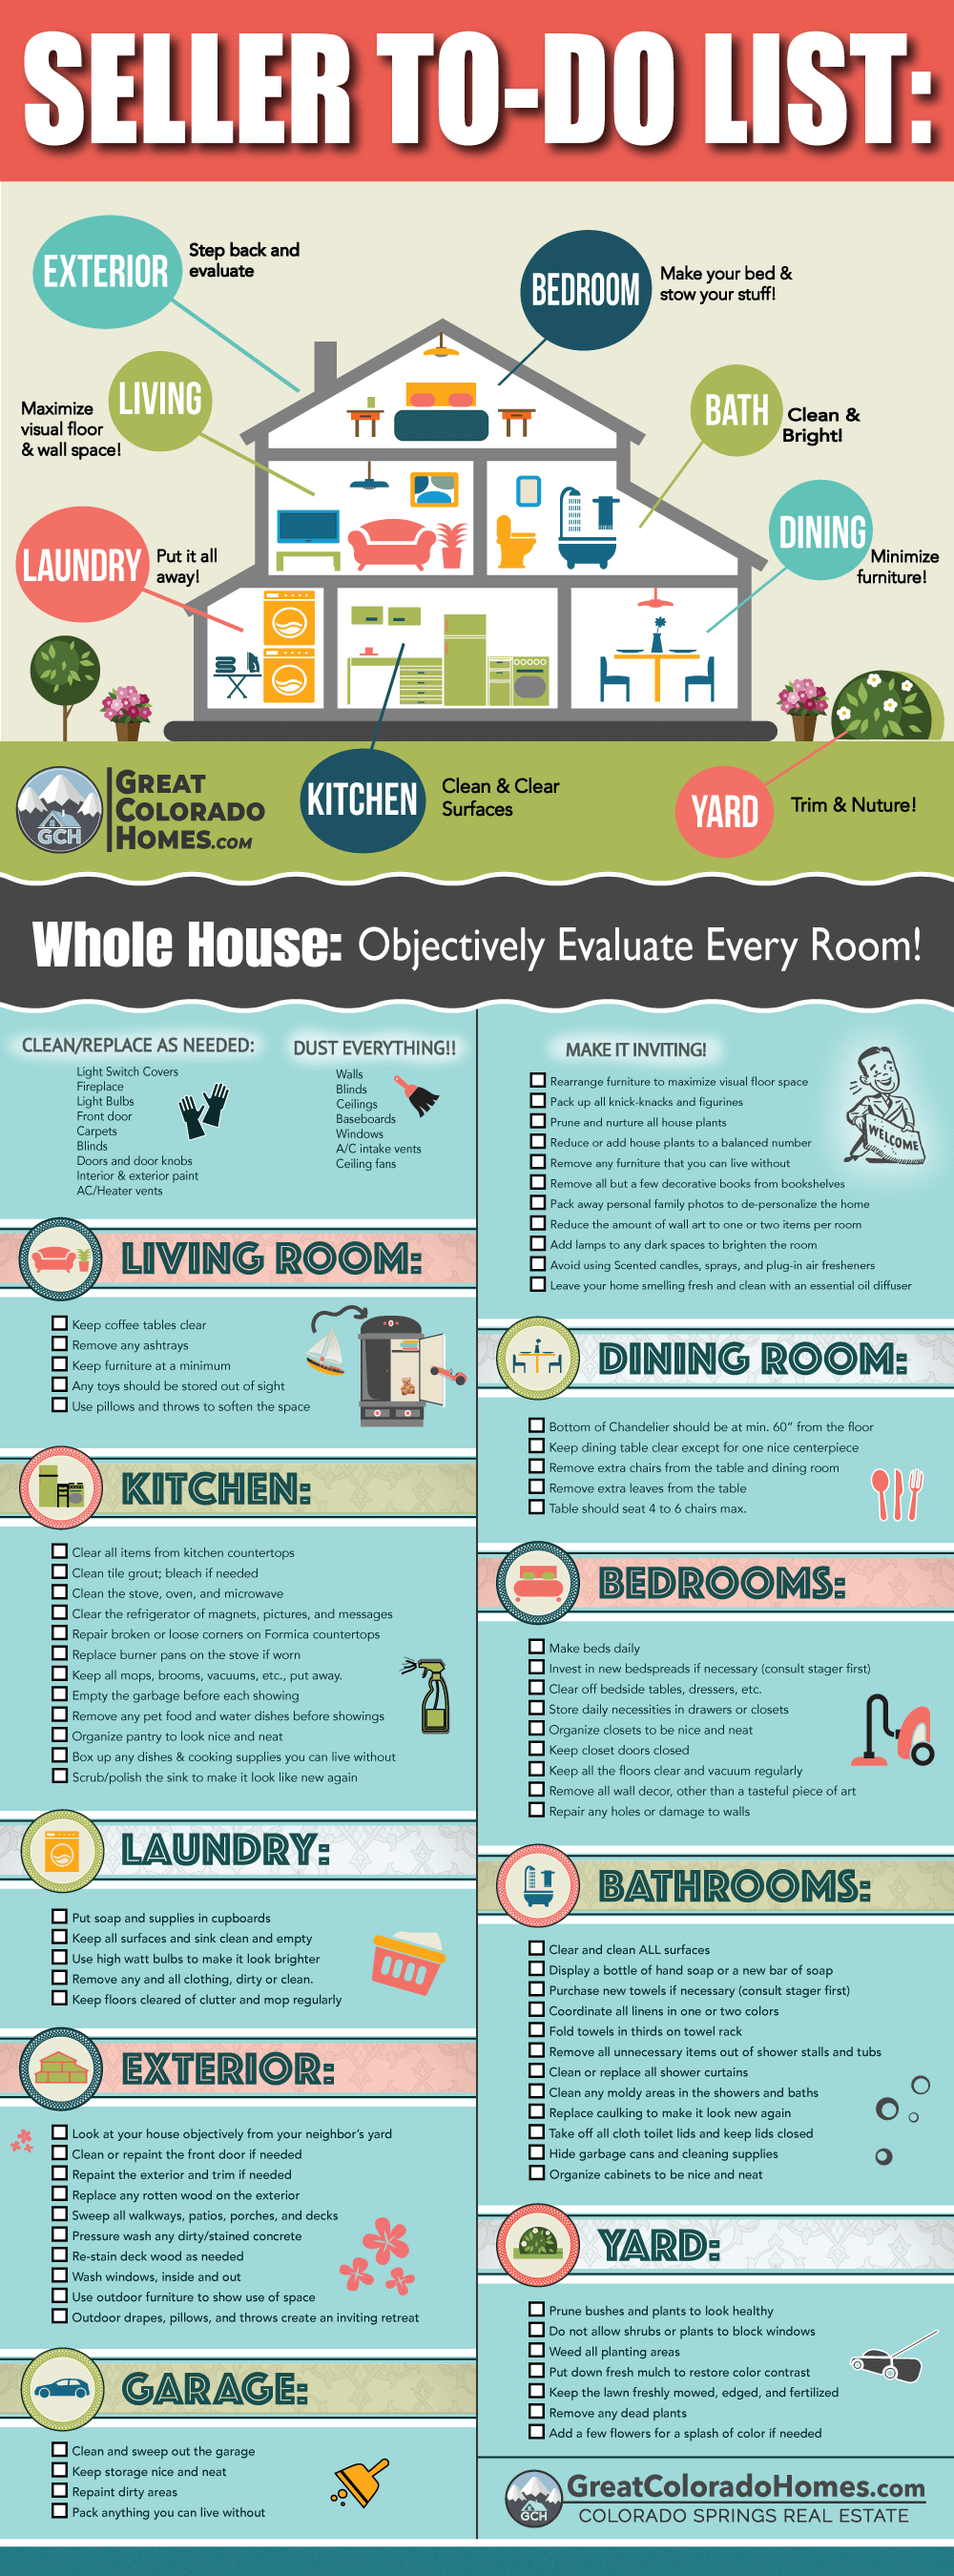 https://greatcoloradohomes.com/storage/blogs/February2024/Home-Sellers-To-Do-Checklist-Infographic2.png